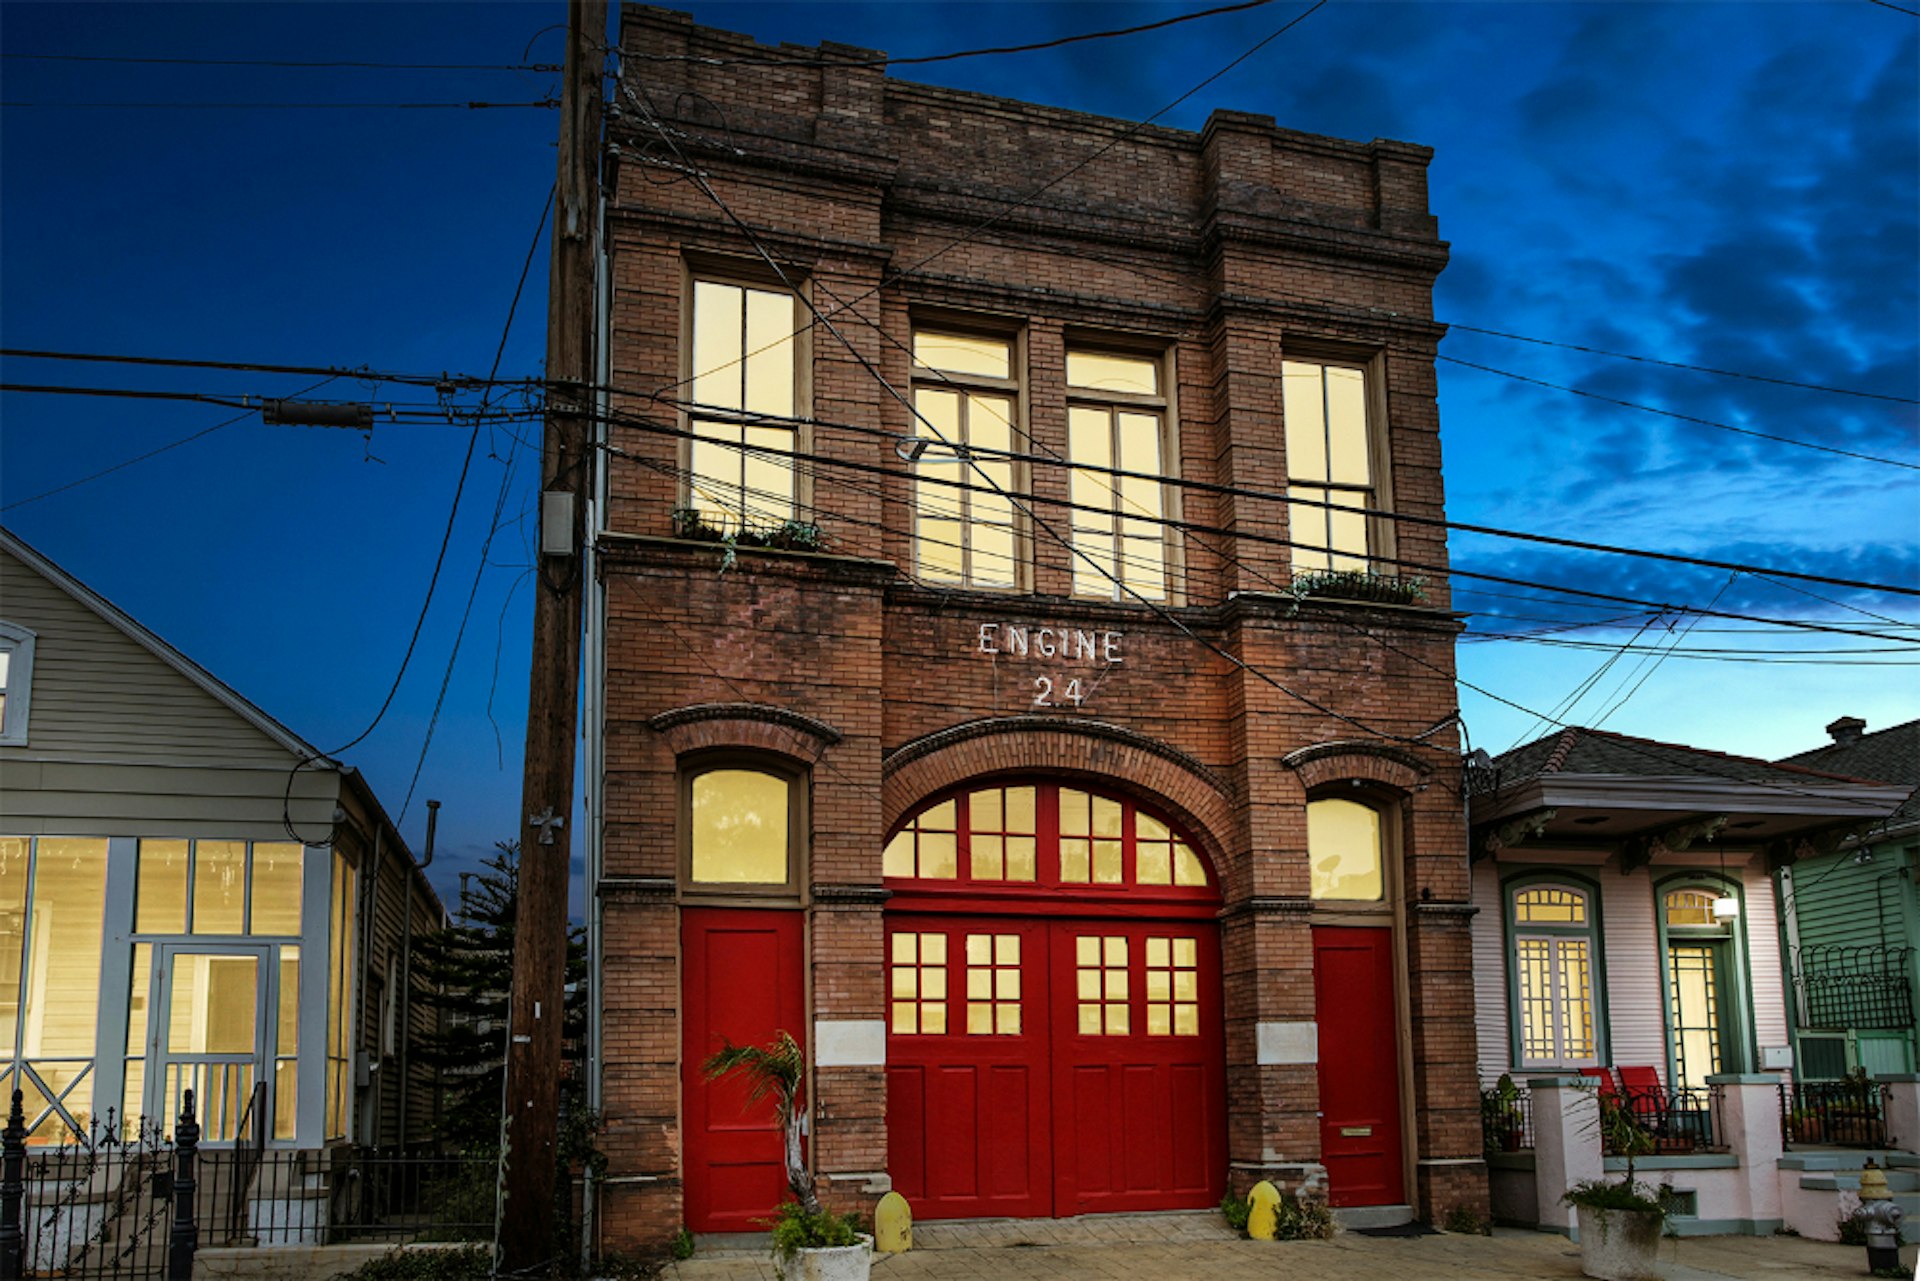 The exterior of Engine 24 Firehouse in Louisiana